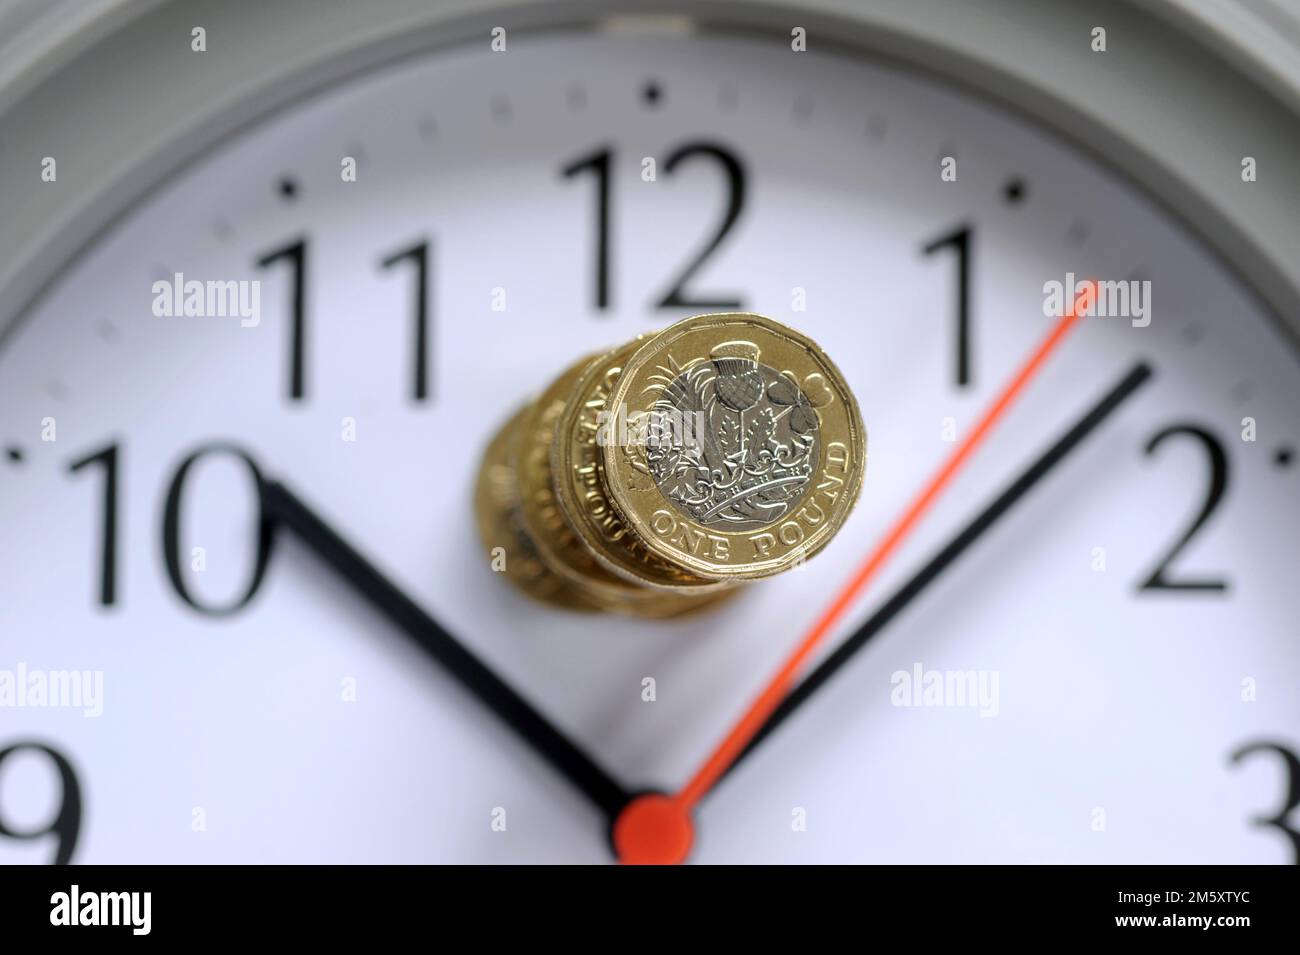 STACK OF ONE POUND COINS ON CLOCK FACE RE COST OF LIVING CRISIS PENSIONS INCOME INFLATION HOUSEHOLD BUDGETS ETC UK Stock Photo